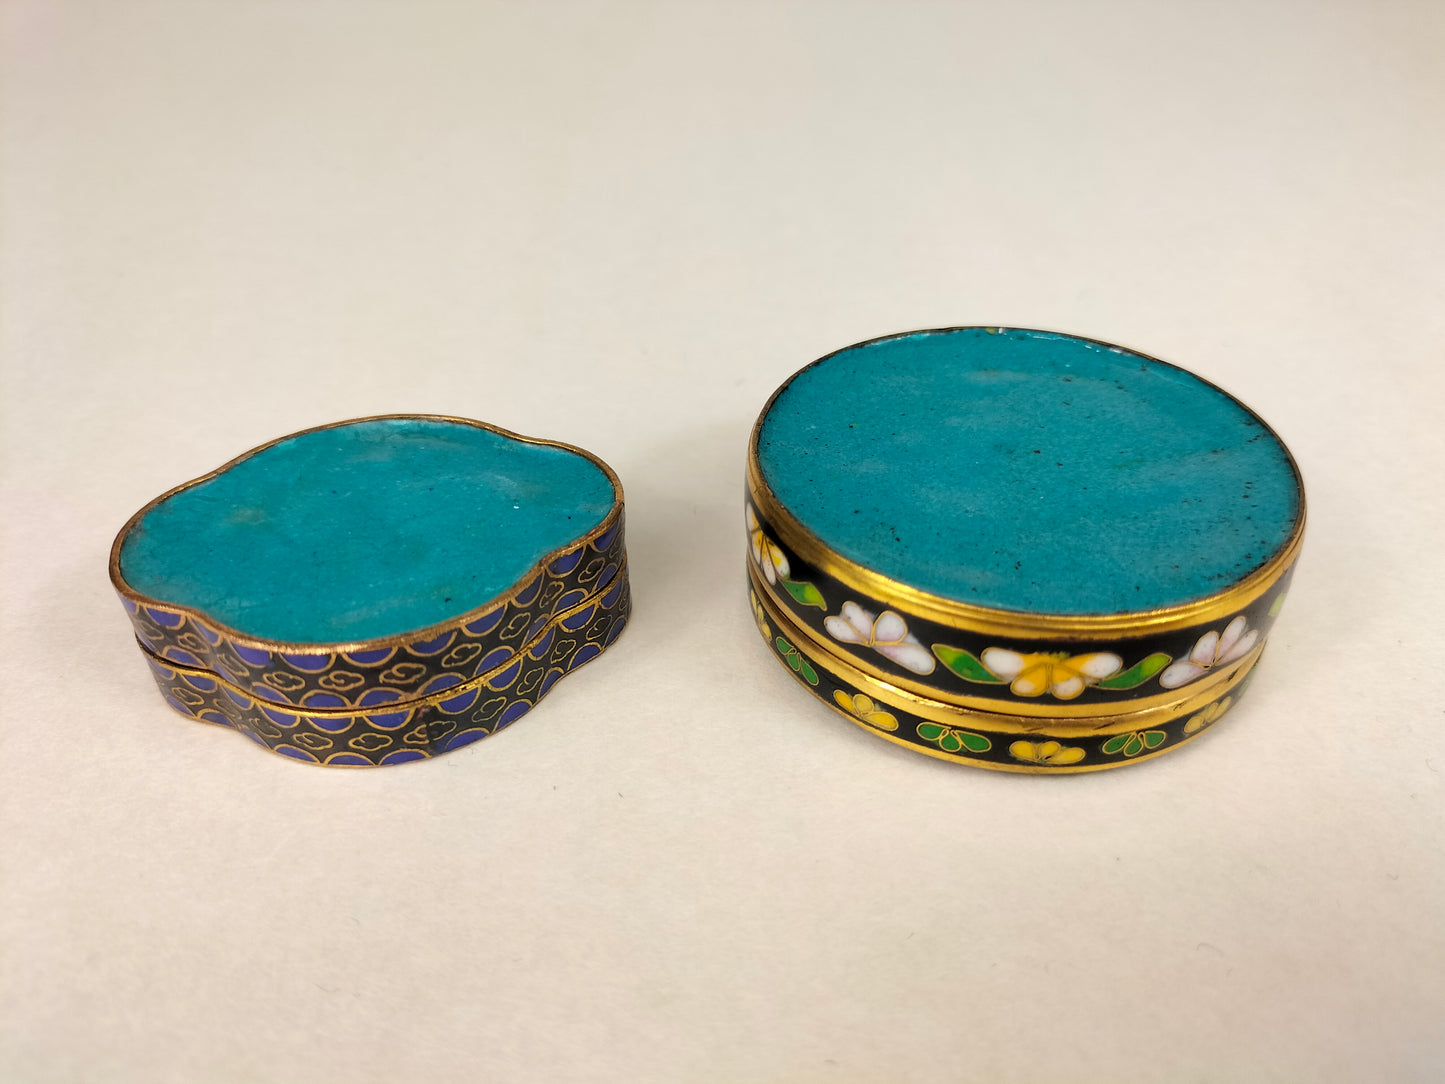 A set of 2 Chinese cloisonne lidded jewelry boxes decorated with flowers // 20th century